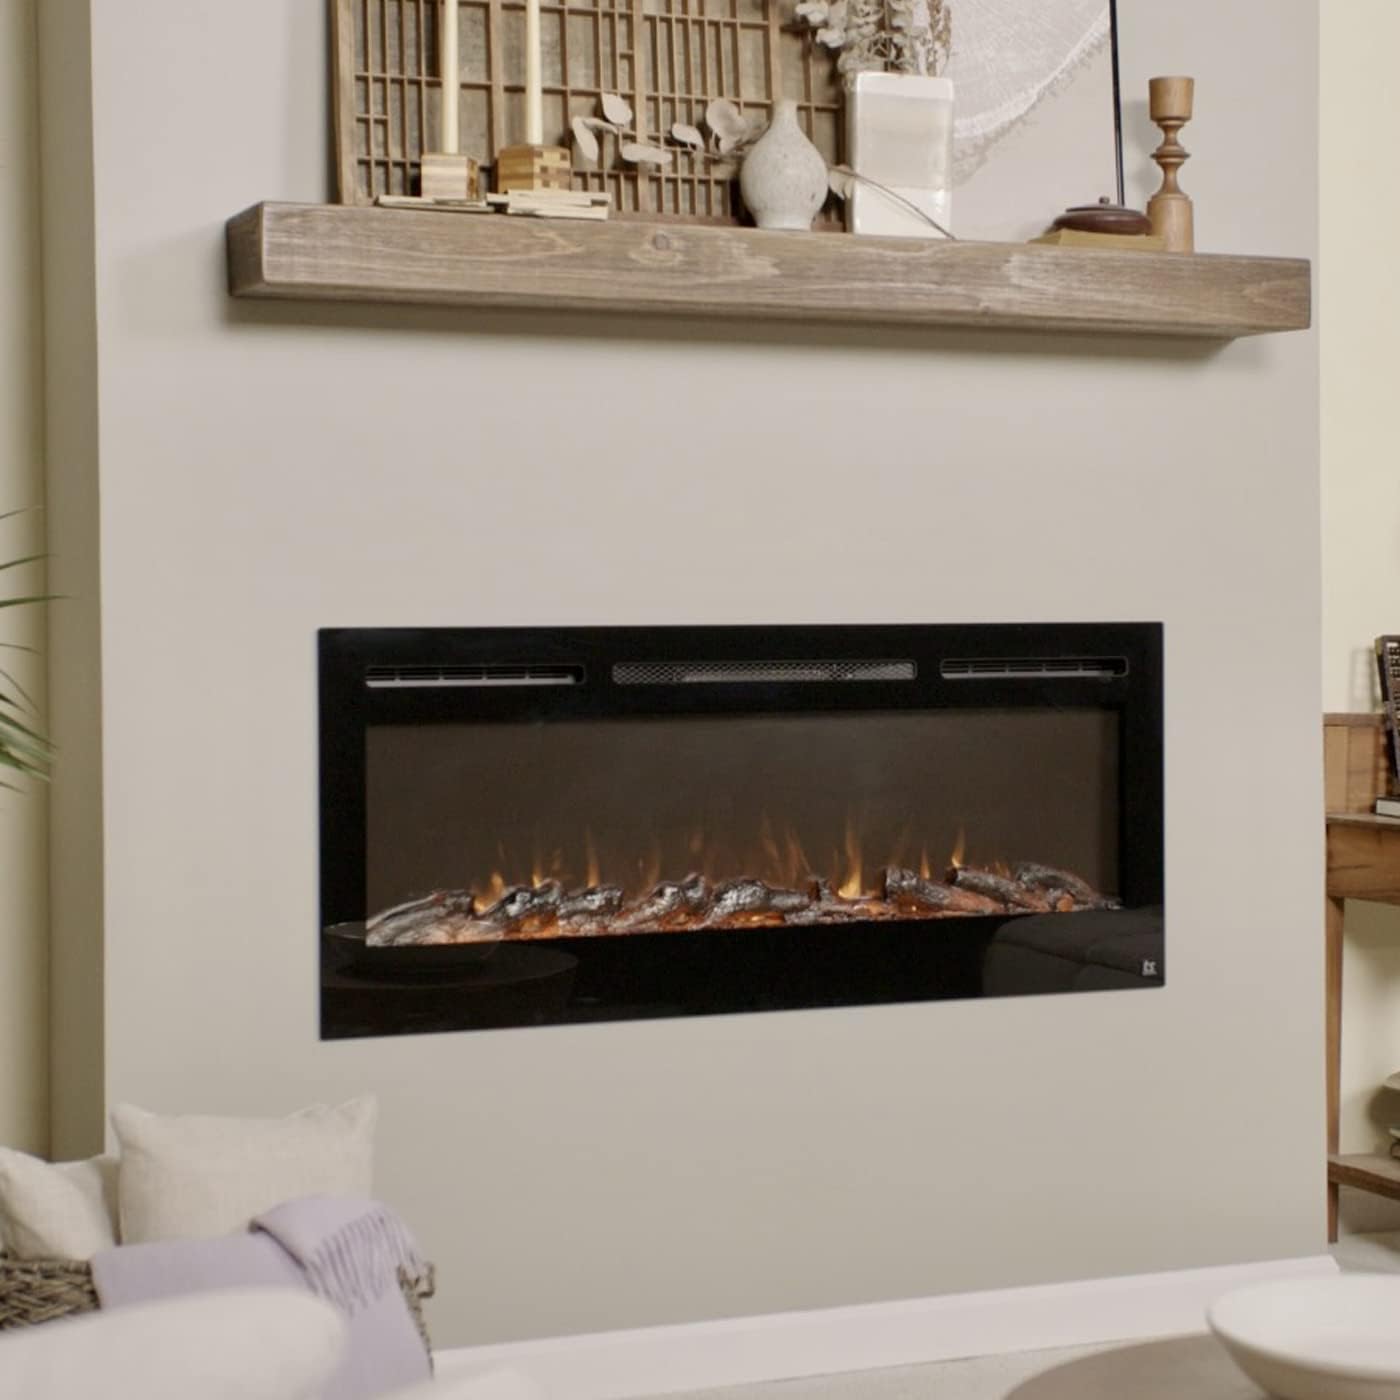 Touchstone 80004 - The Sideline Electric Fireplace 